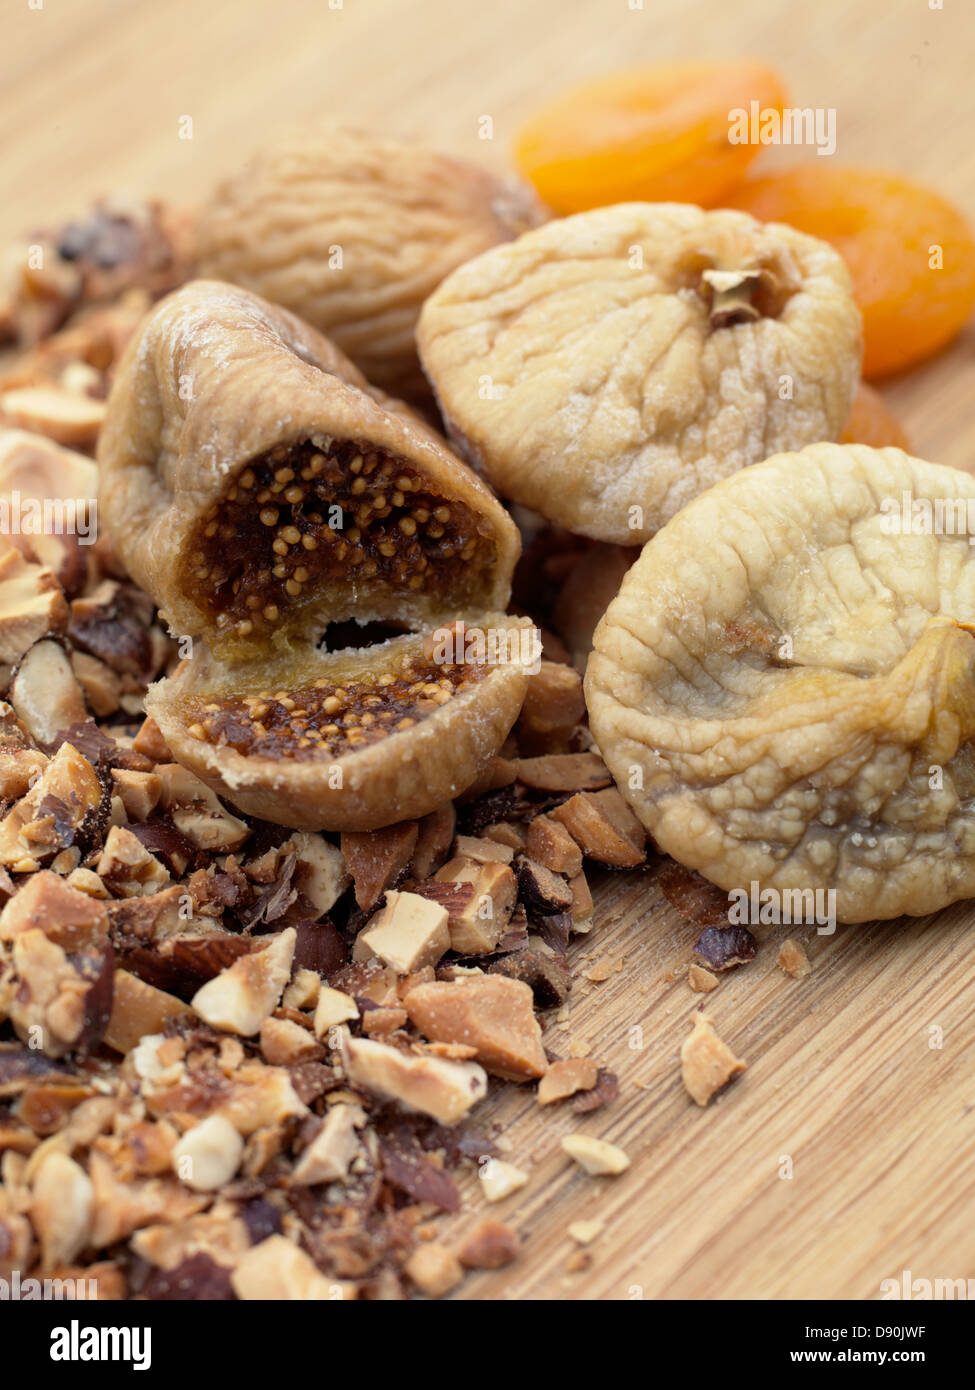 Dried food on table Stock Photo